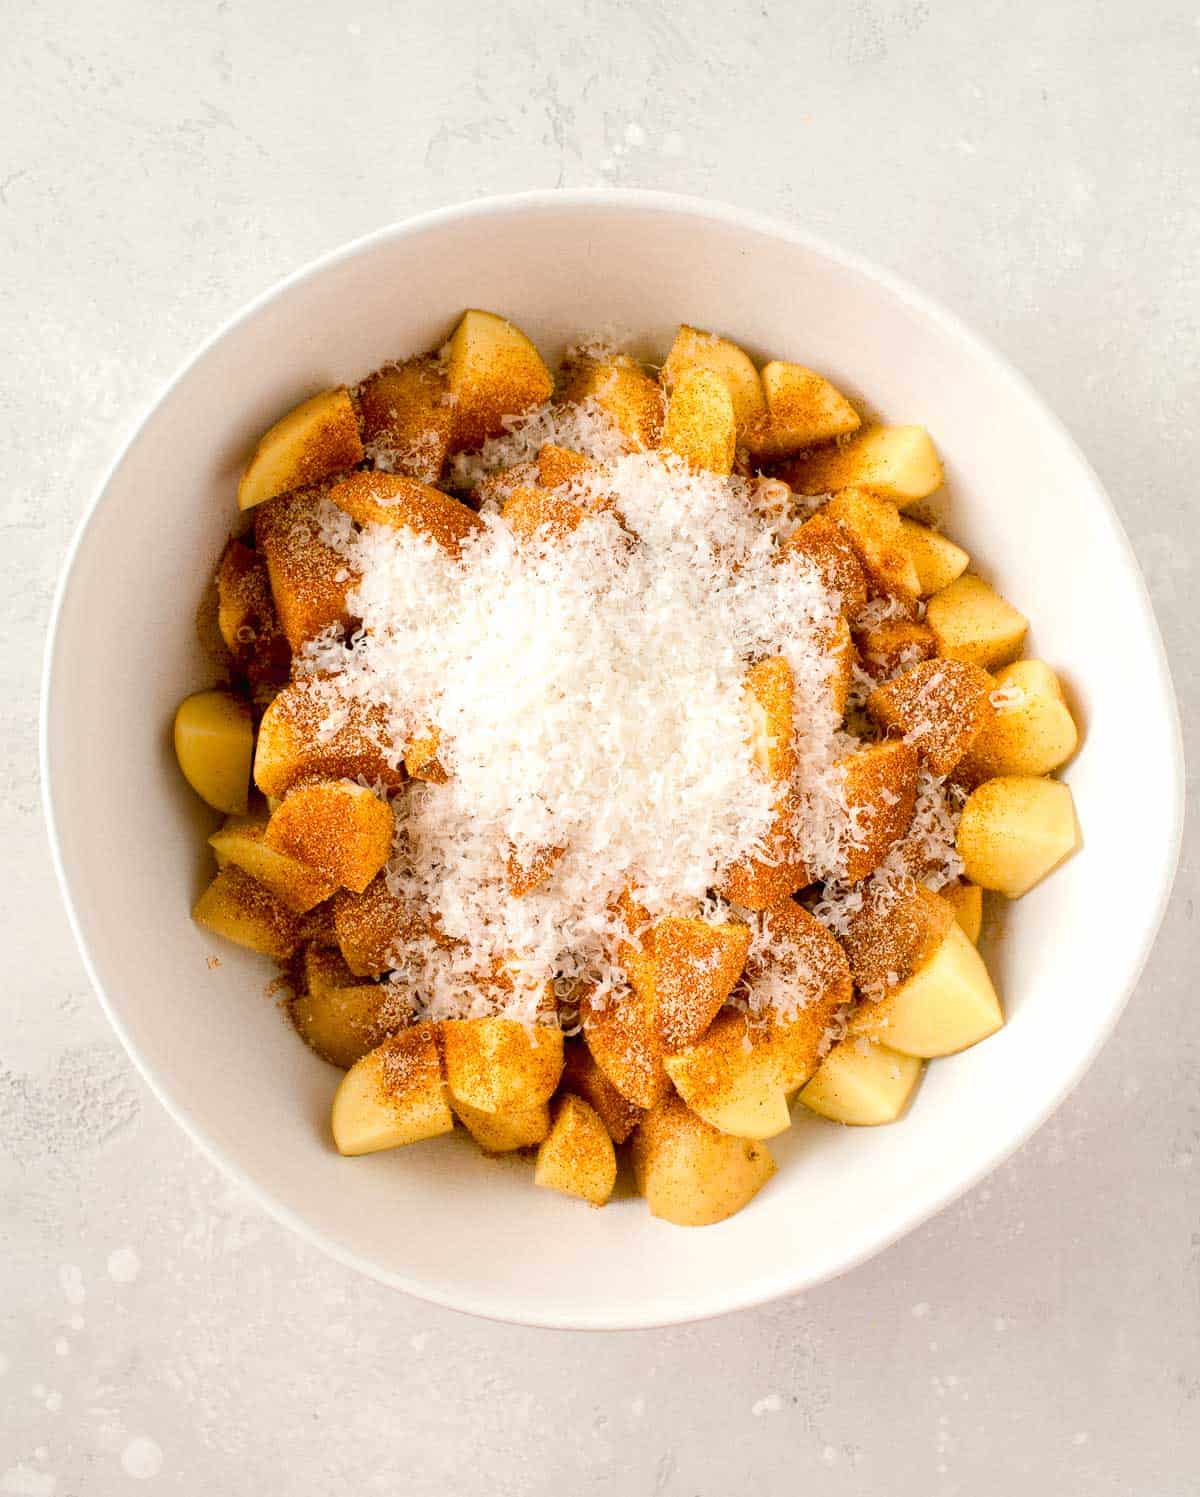 seasonings and freshly grated parmesan cheese on top of potatoes in a white bowl